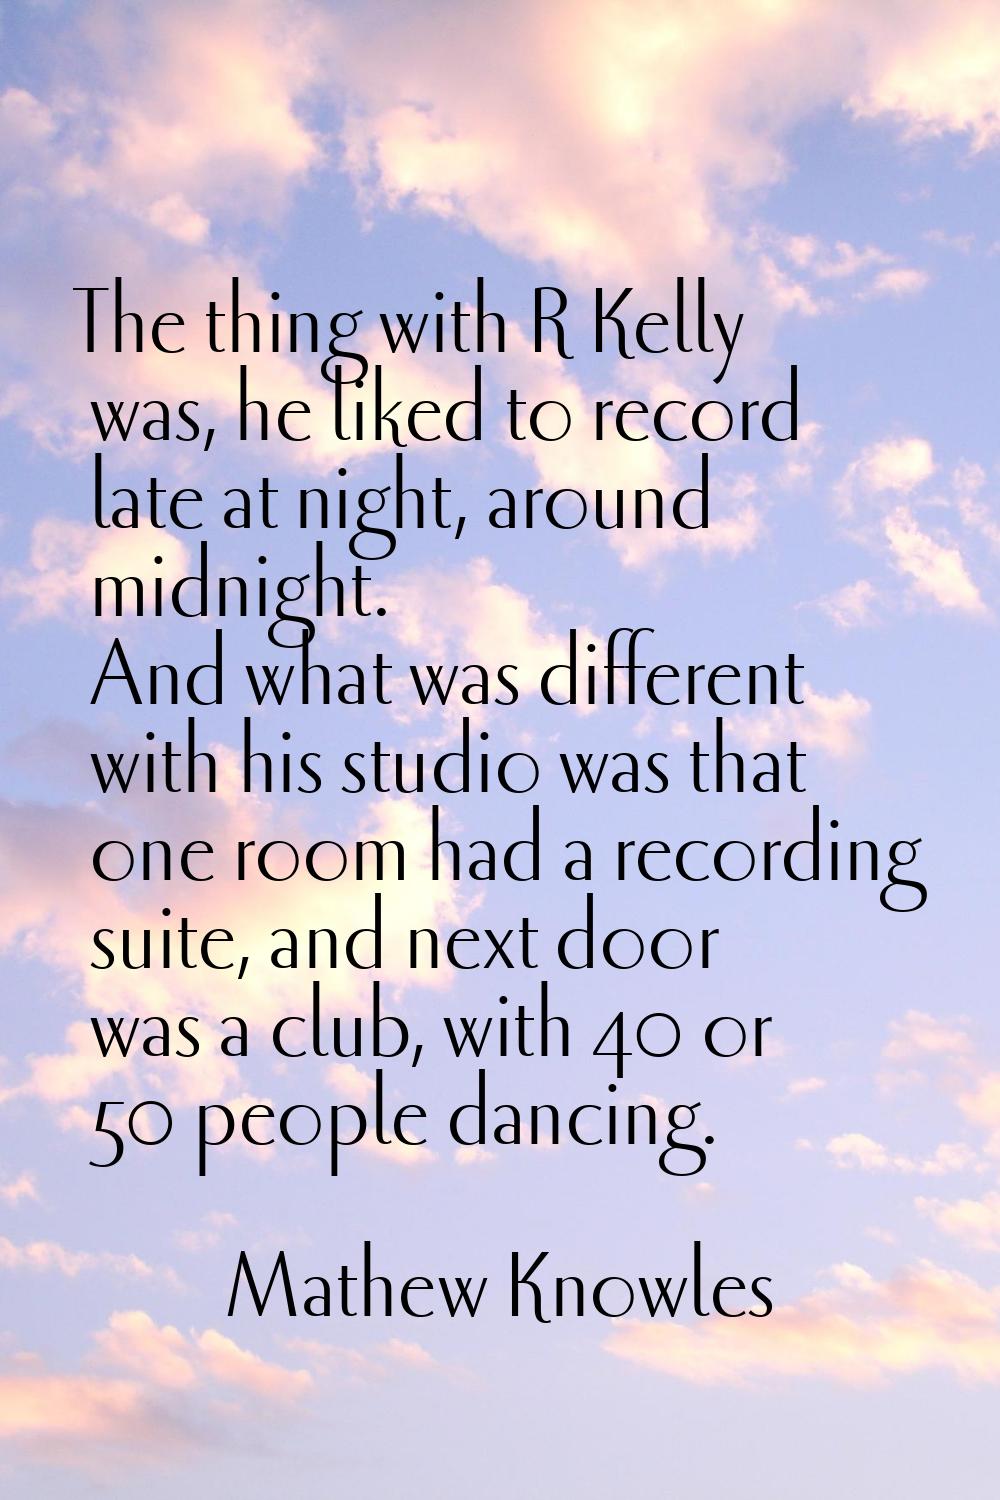 The thing with R Kelly was, he liked to record late at night, around midnight. And what was differe